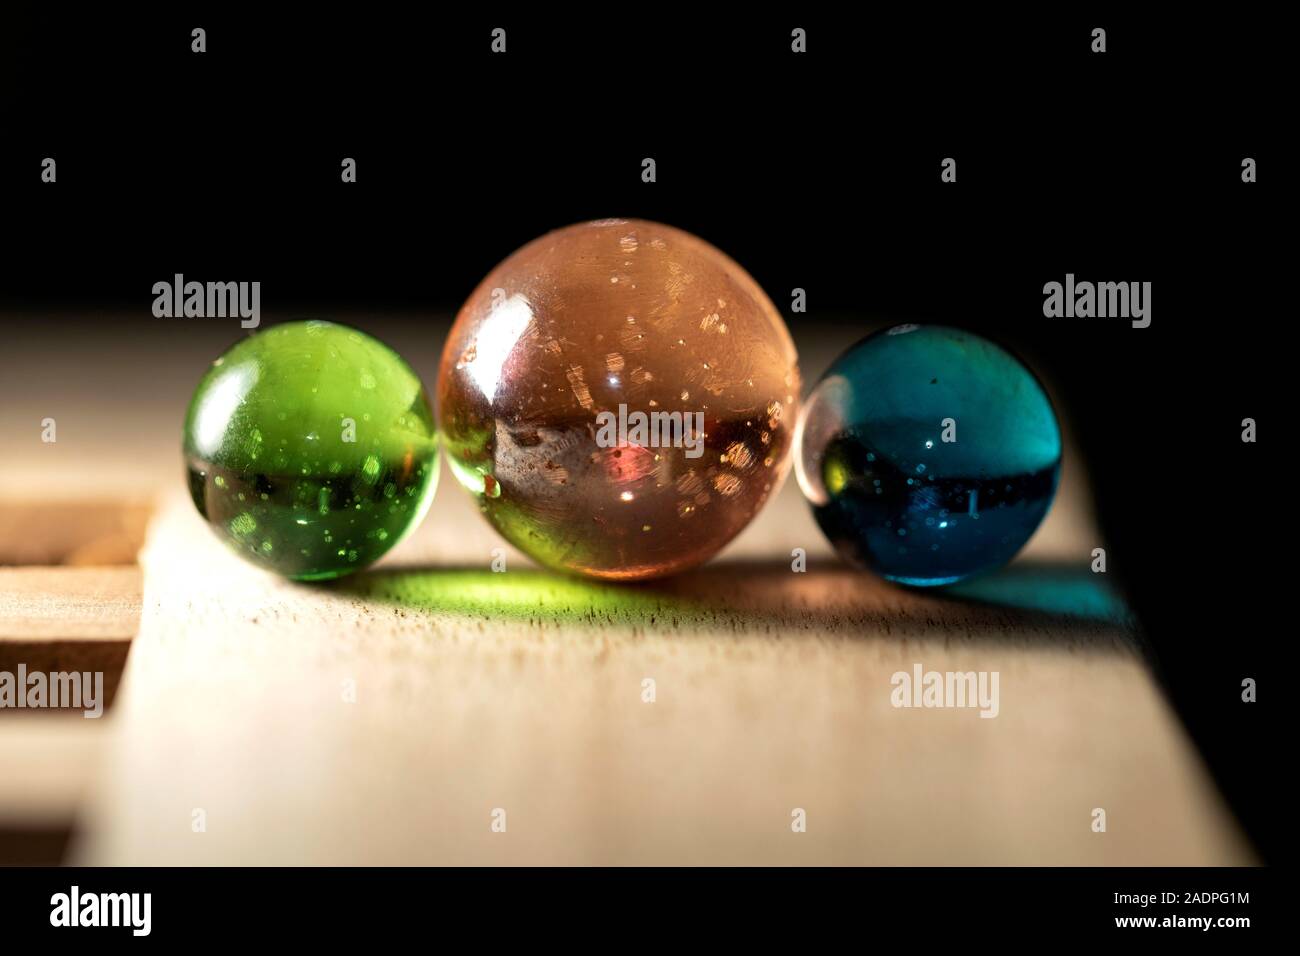 A close up portrait of three different colored marbles on a wooden surface casting colorful reflections. The glass spheres are orange, green and blue. Stock Photo